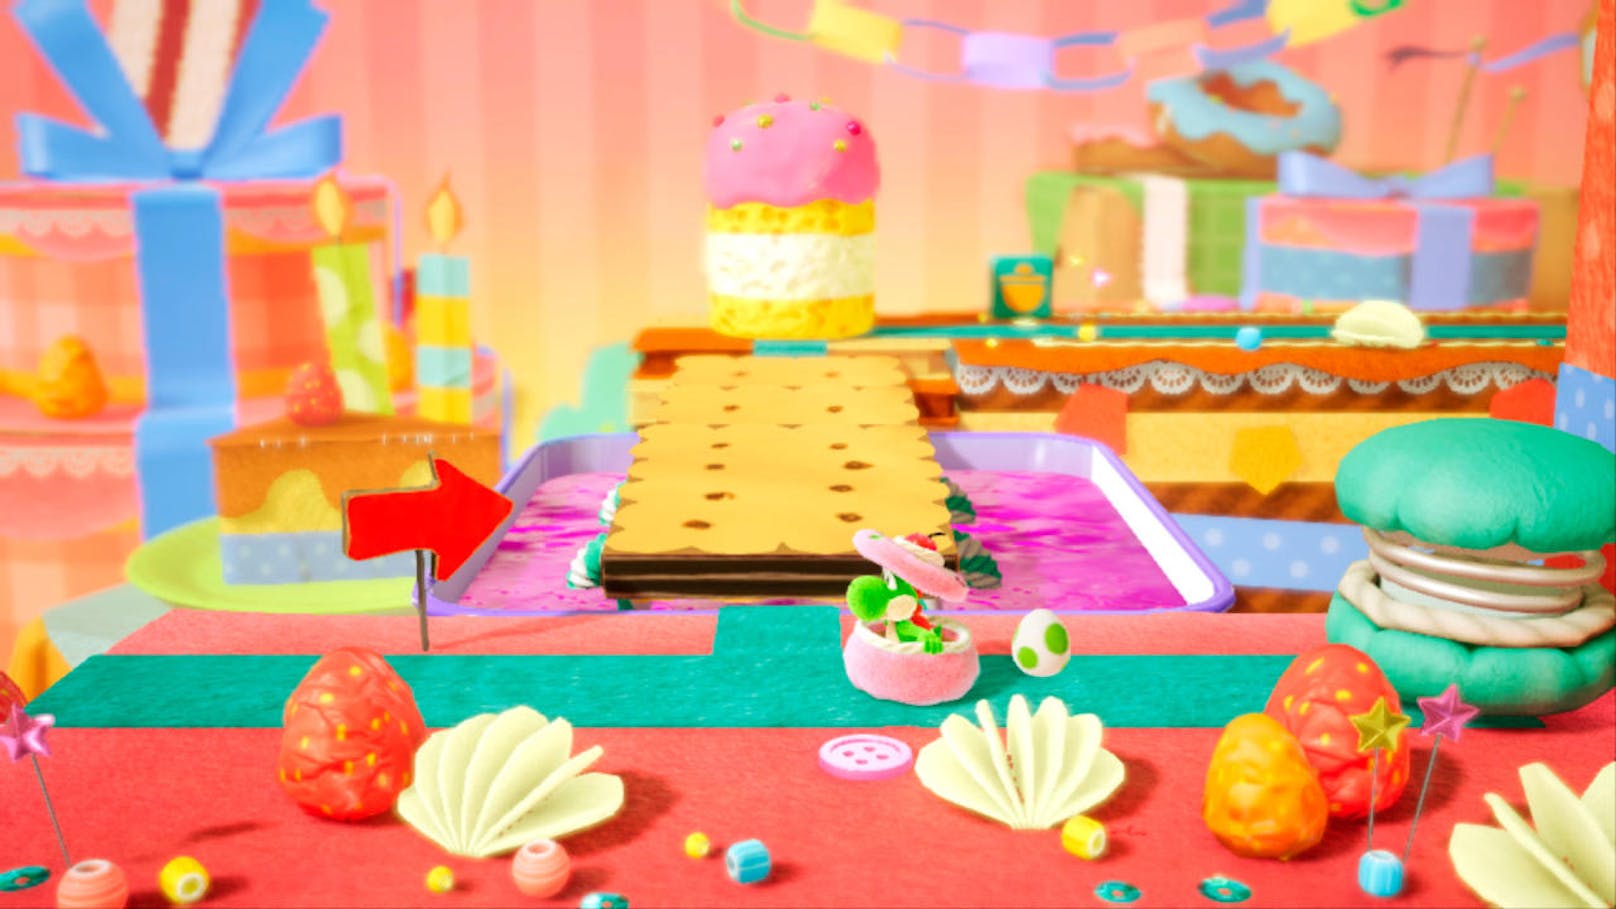  <a href="https://www.heute.at/digital/games/story/Yoshis-Crafted-World-Test-Review-Nintendo-Switch-49099991" target="_blank">Yoshi's Crafted World</a>